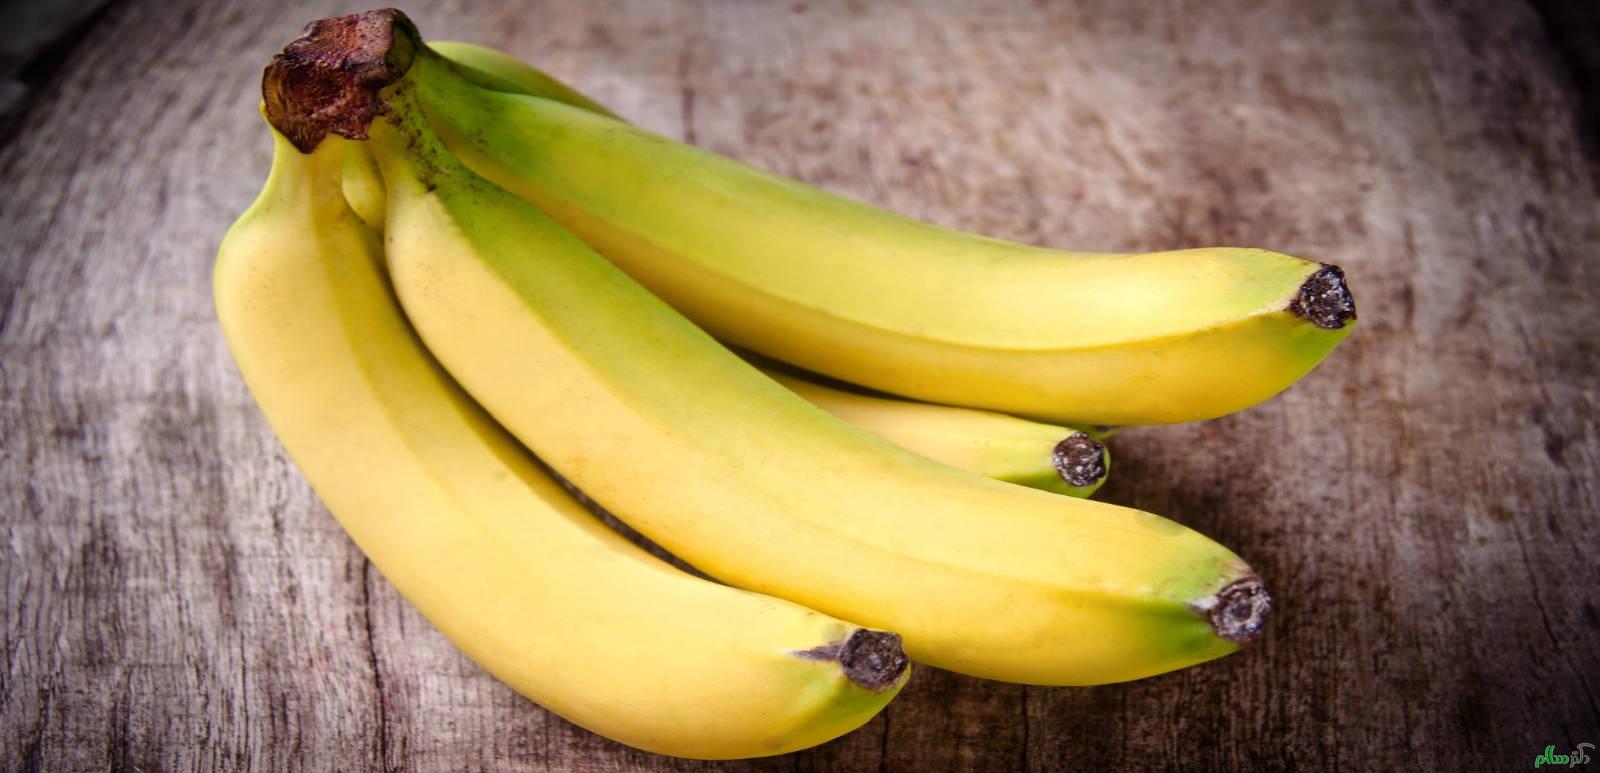 bananas-25-shocking-facts-featured